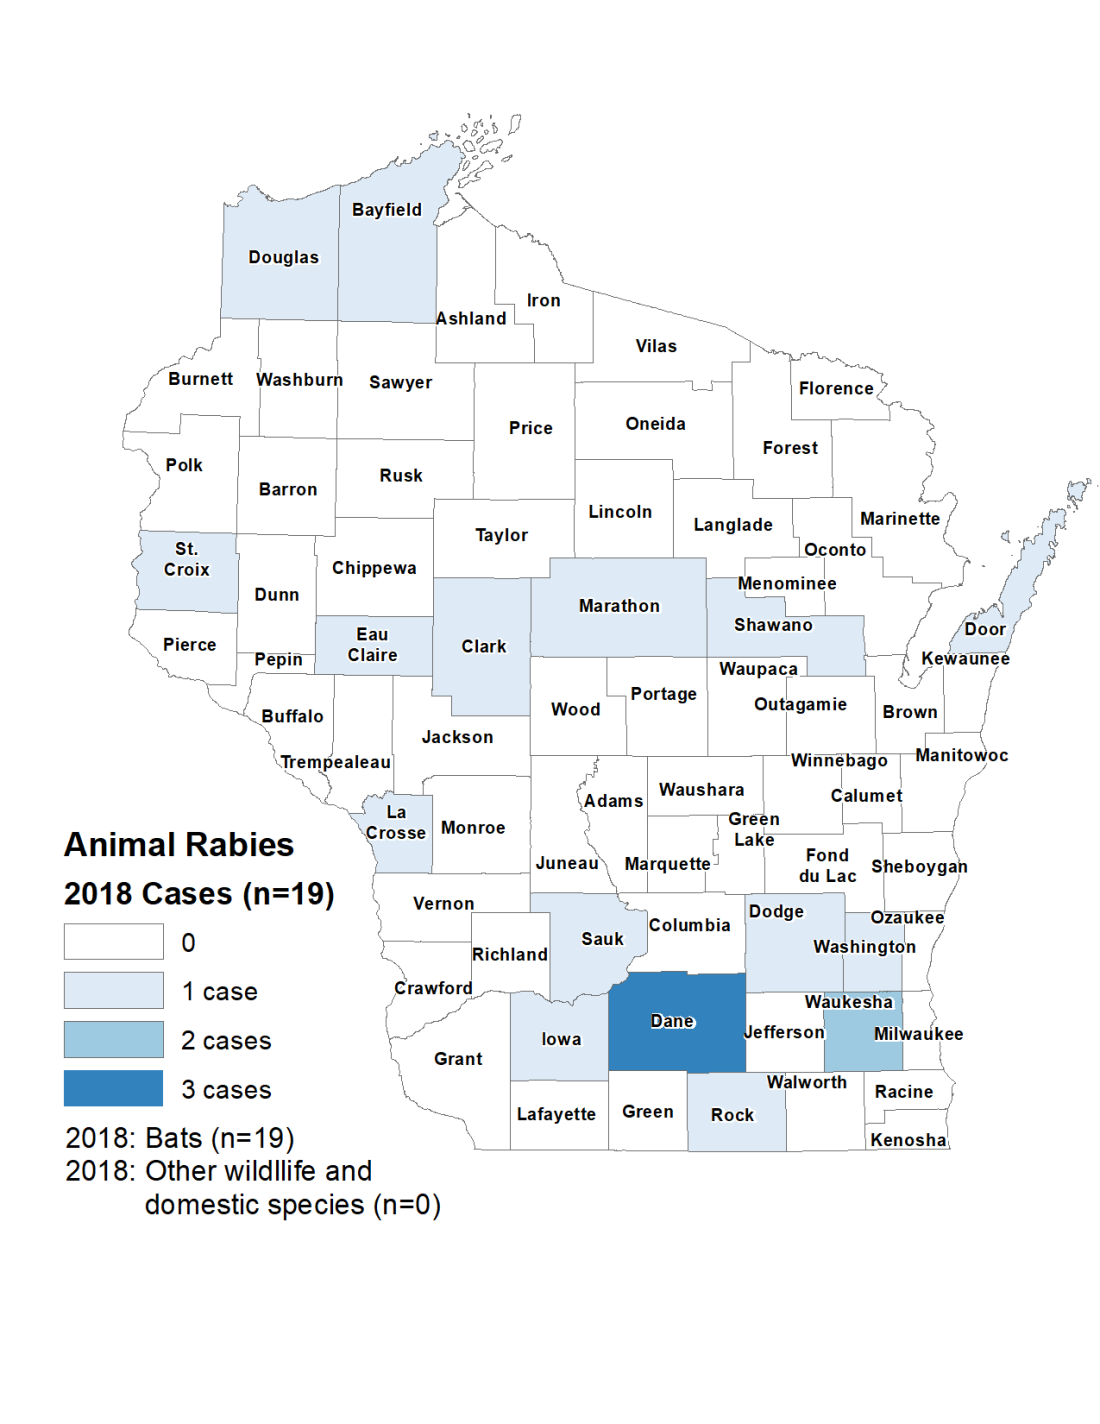 Map showing rabies cases